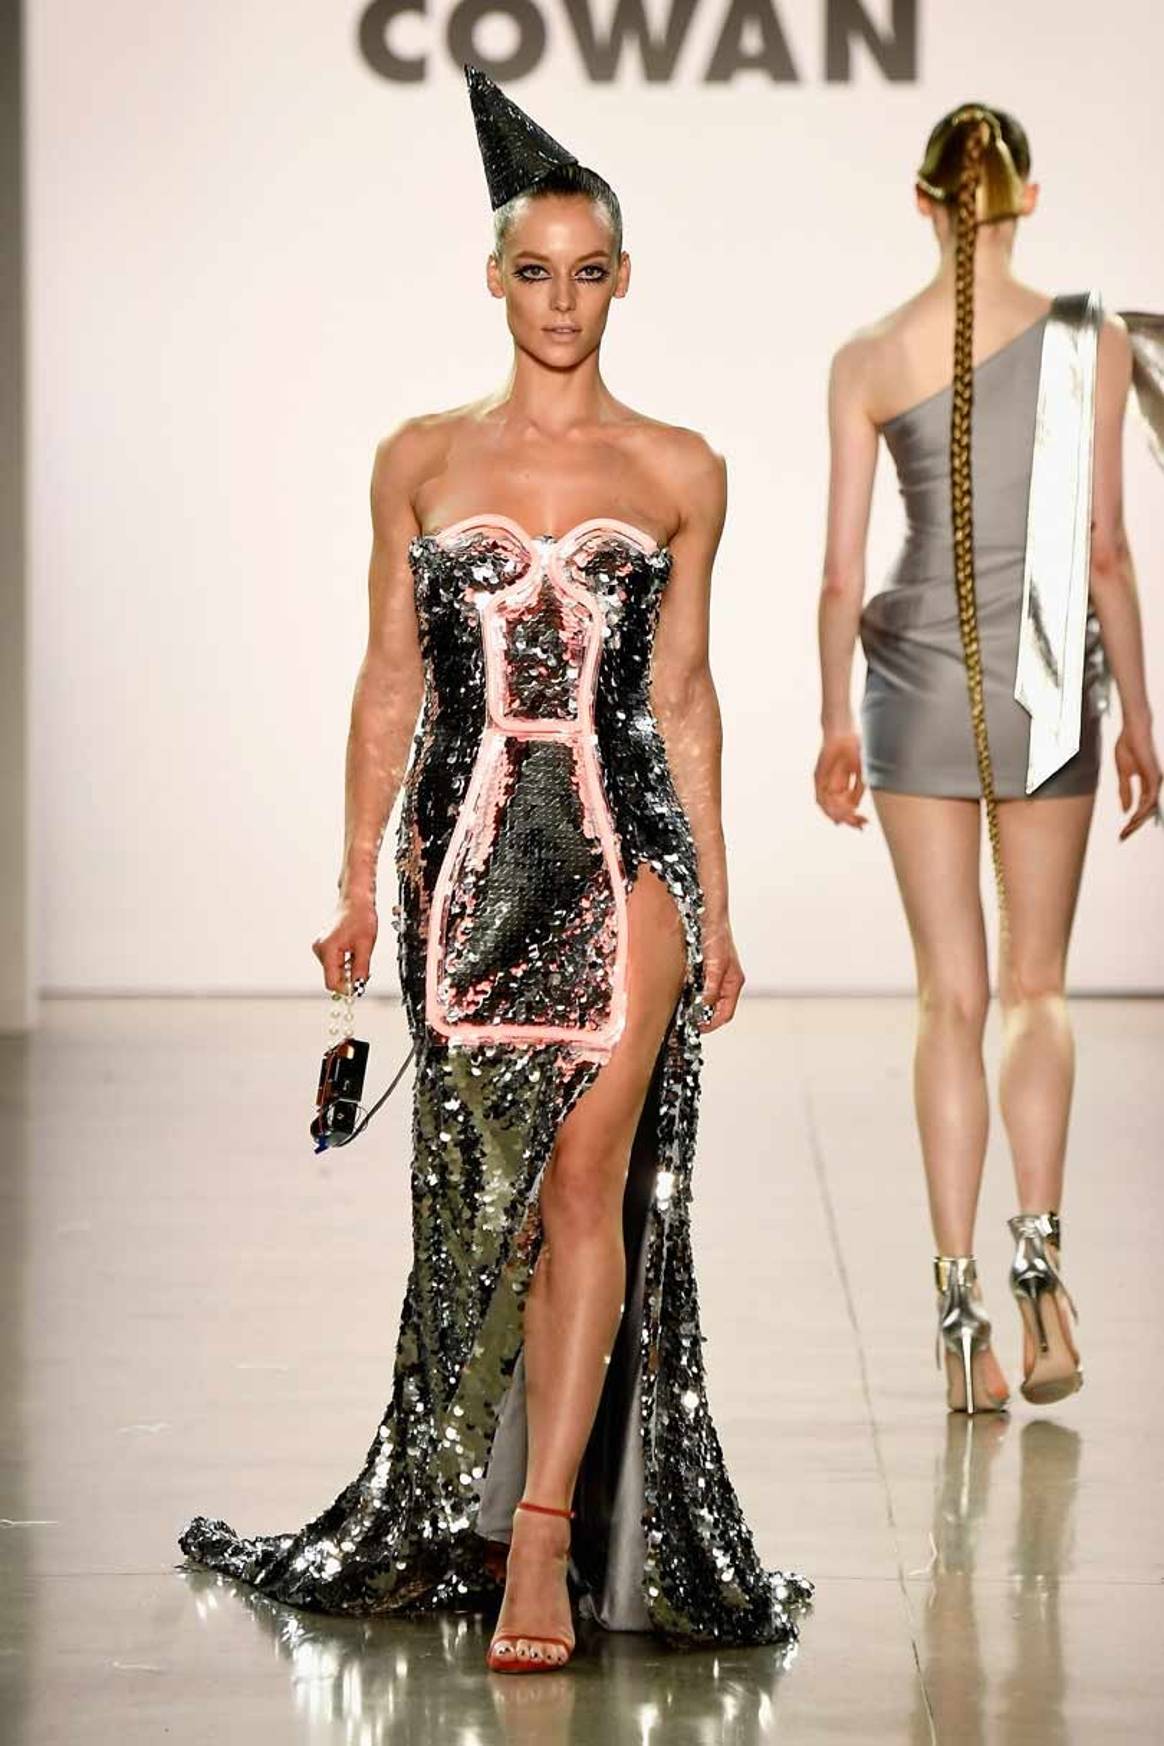 Christian Cowan goes for glitter and glamour for New York Fashion Week